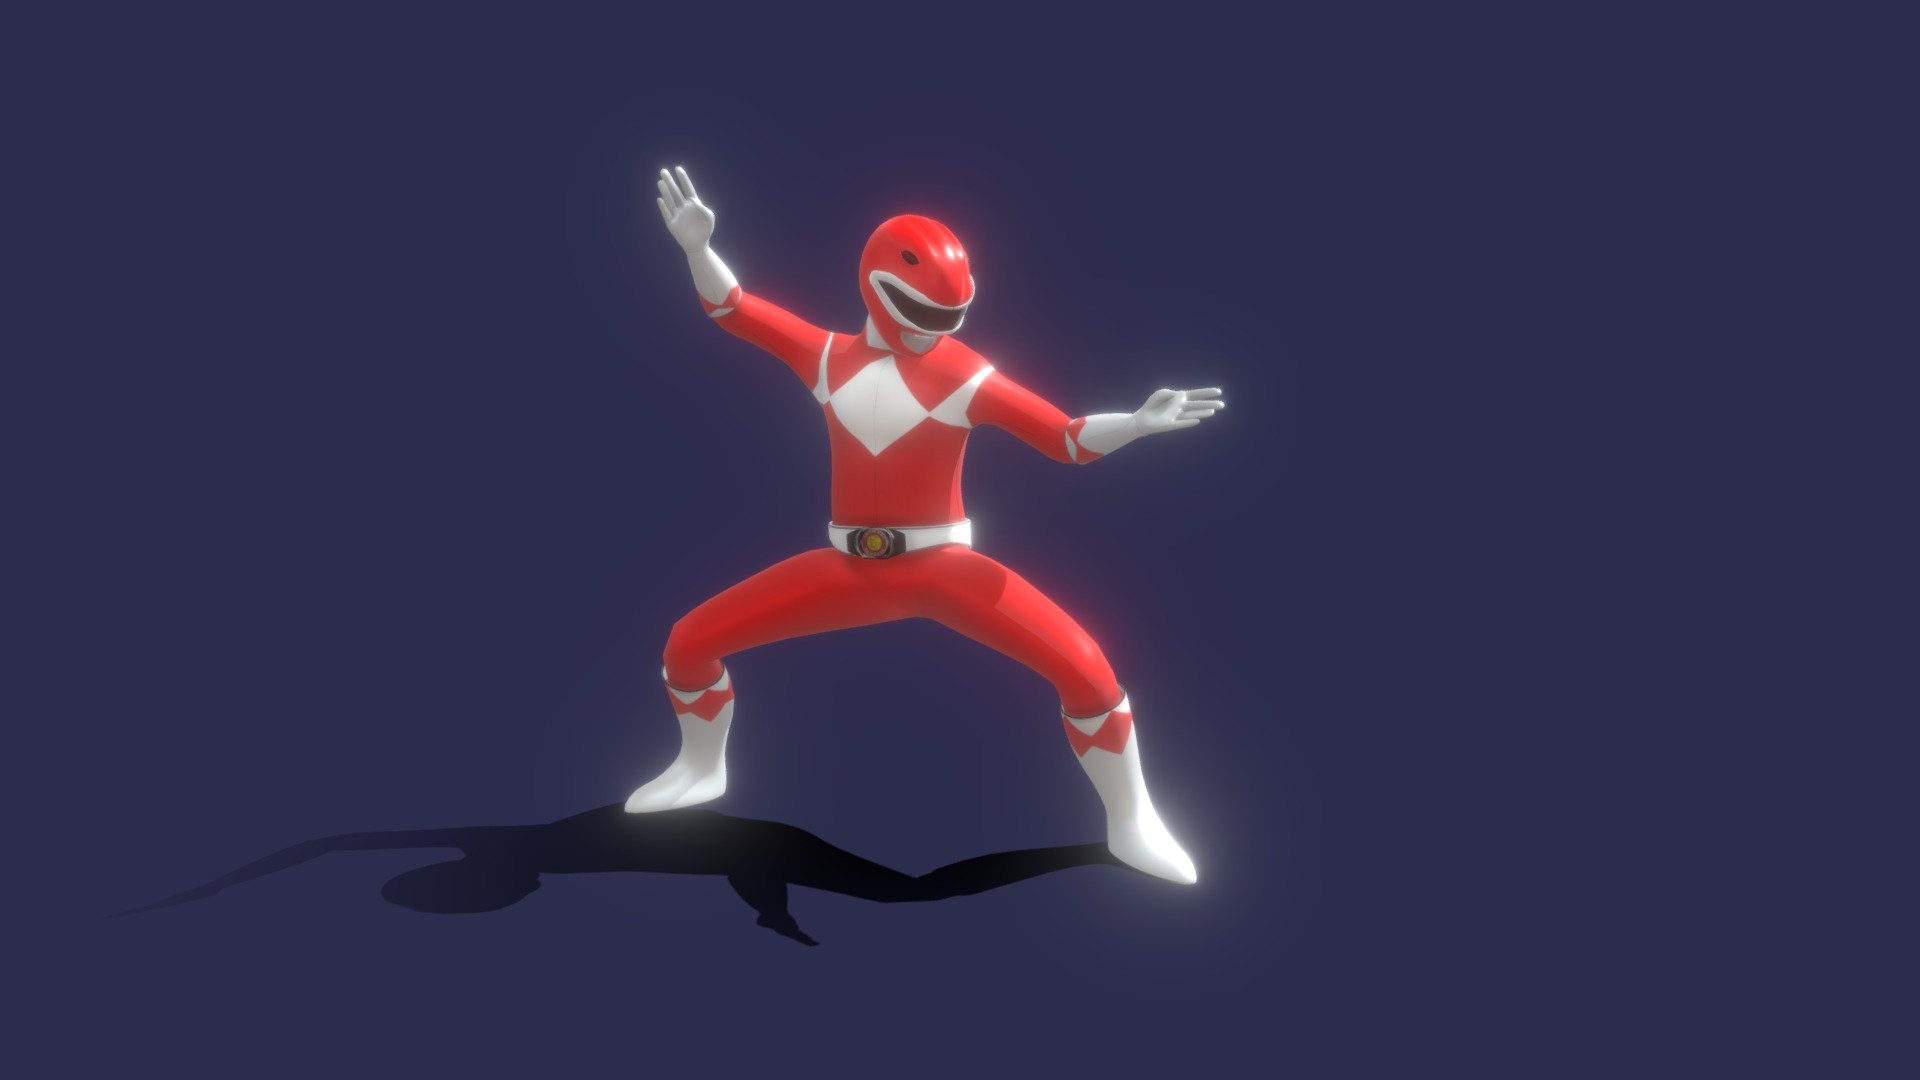 The Red Ranger is one of the members of the Mighty Morphin' Power Rangers team.

During the first stage of these Power Rangers, the Red Ranger was the leader of the team until Zordon created the White Ranger with more powers to be the new leader 3d model